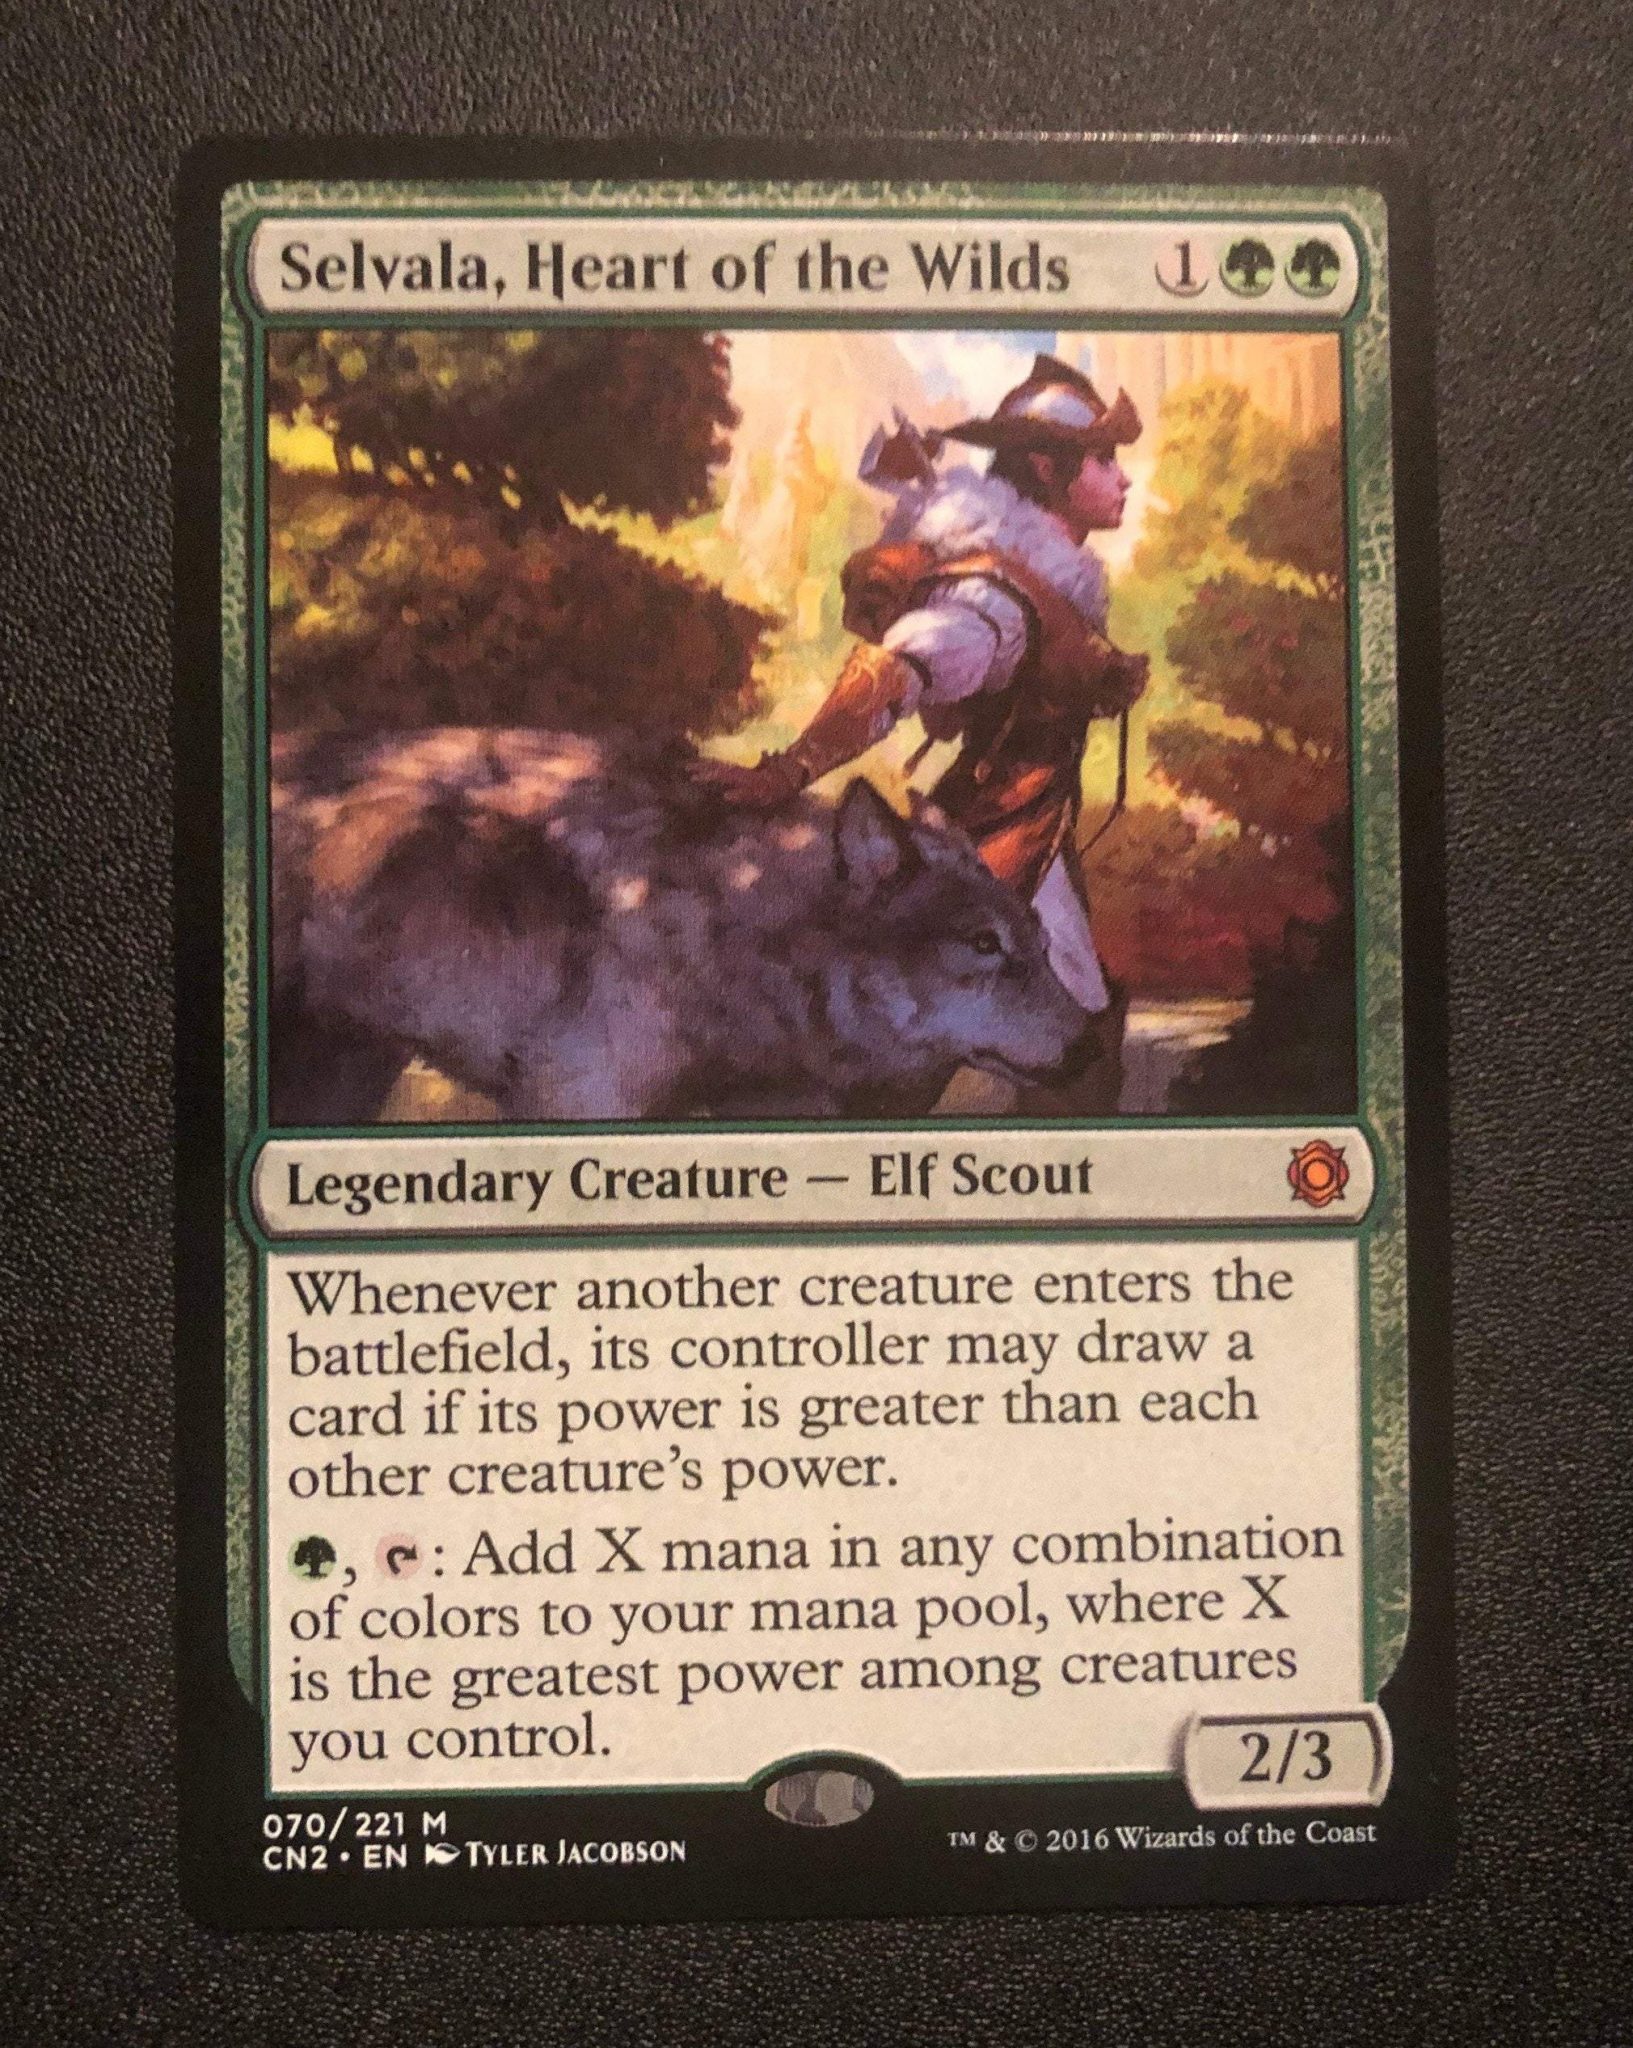 wow what are heart of the wilds used for